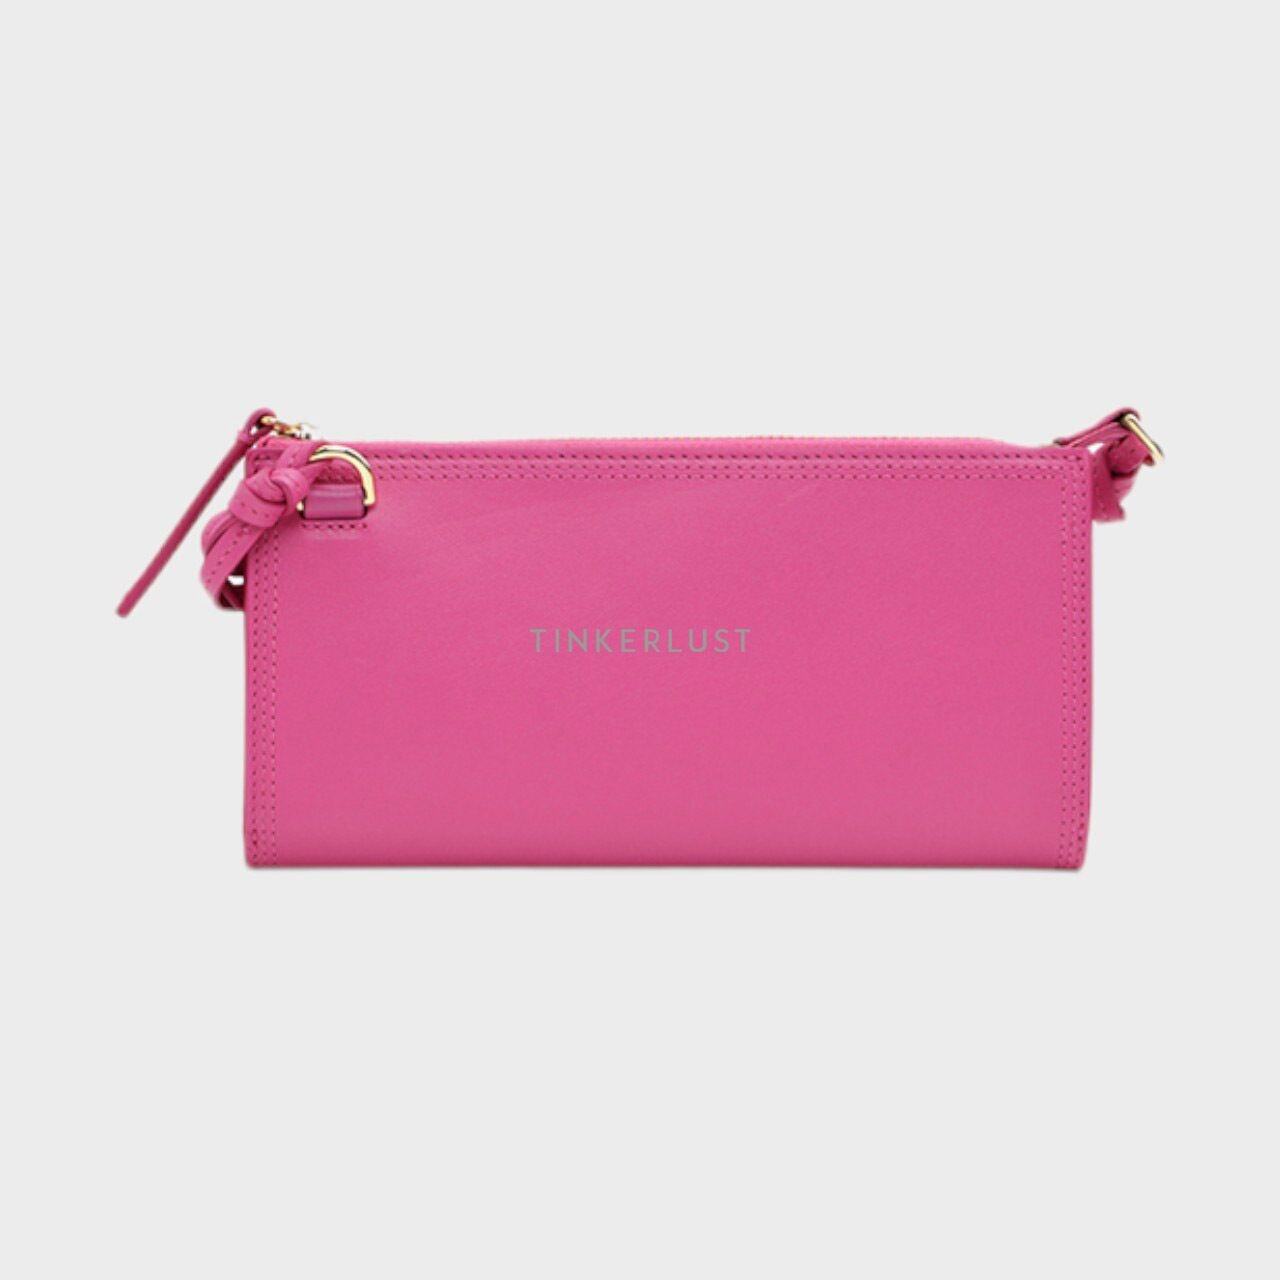 Jacquemus Le Pichoto Pouch in Pink